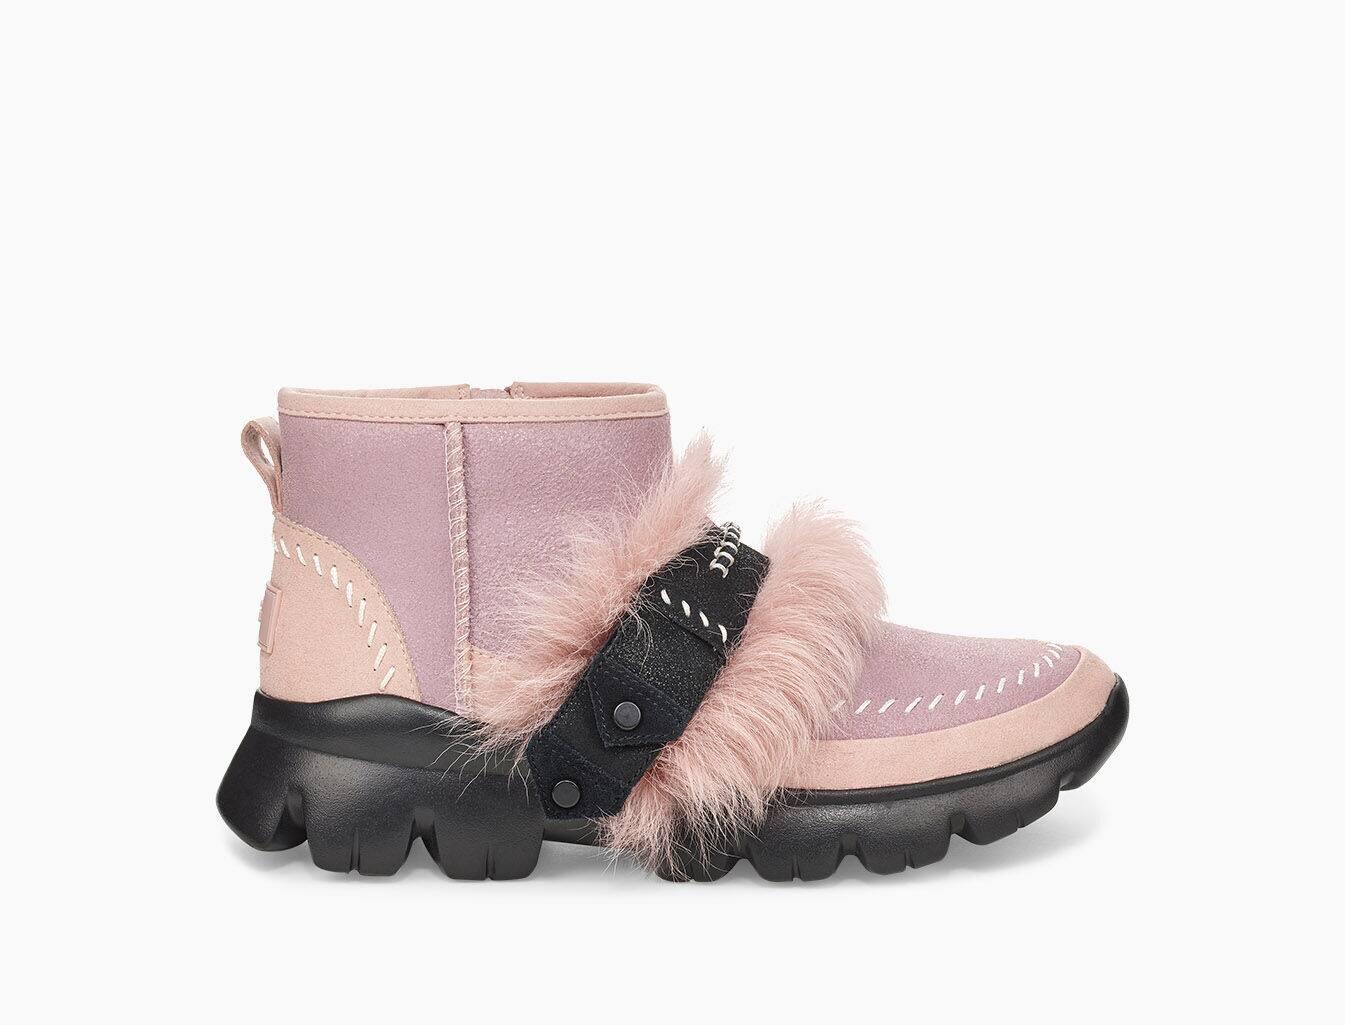 UGG Wool Fluff Punk Ankle Boot in Pink Crystal (Pink) - Lyst